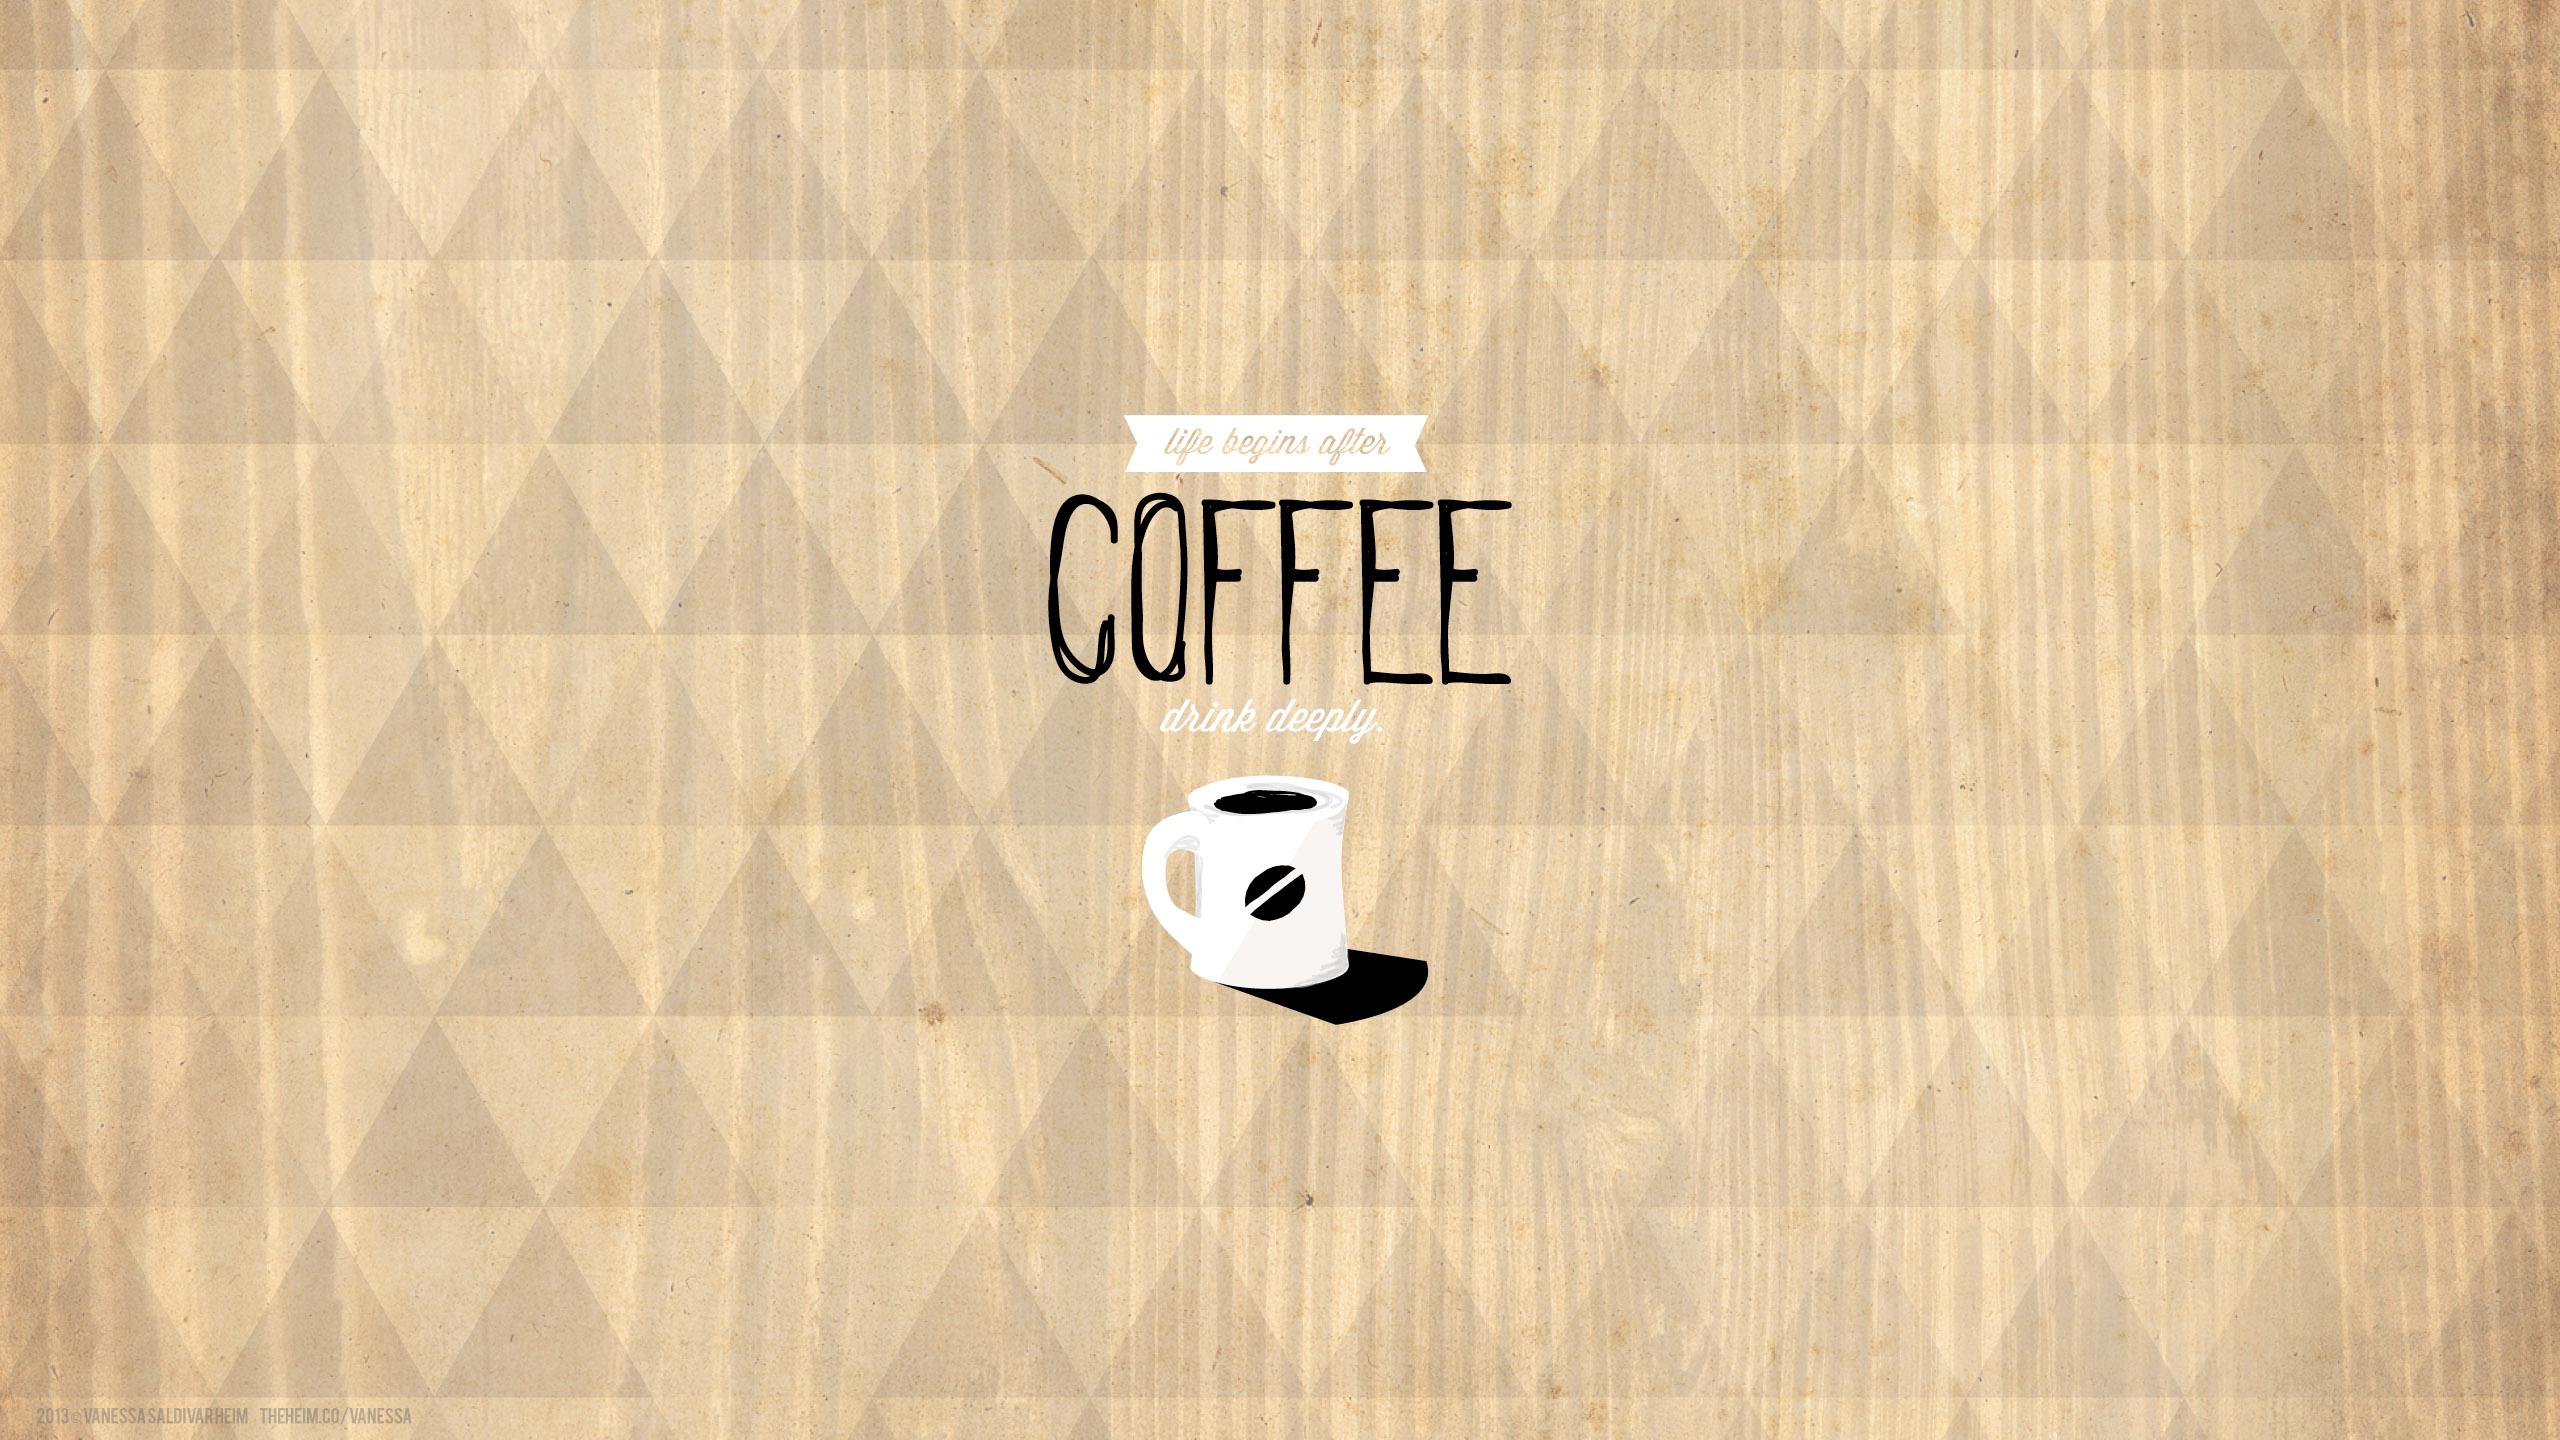 Cute Starbucks Wallpaper Pictures - Graphic Design , HD Wallpaper & Backgrounds